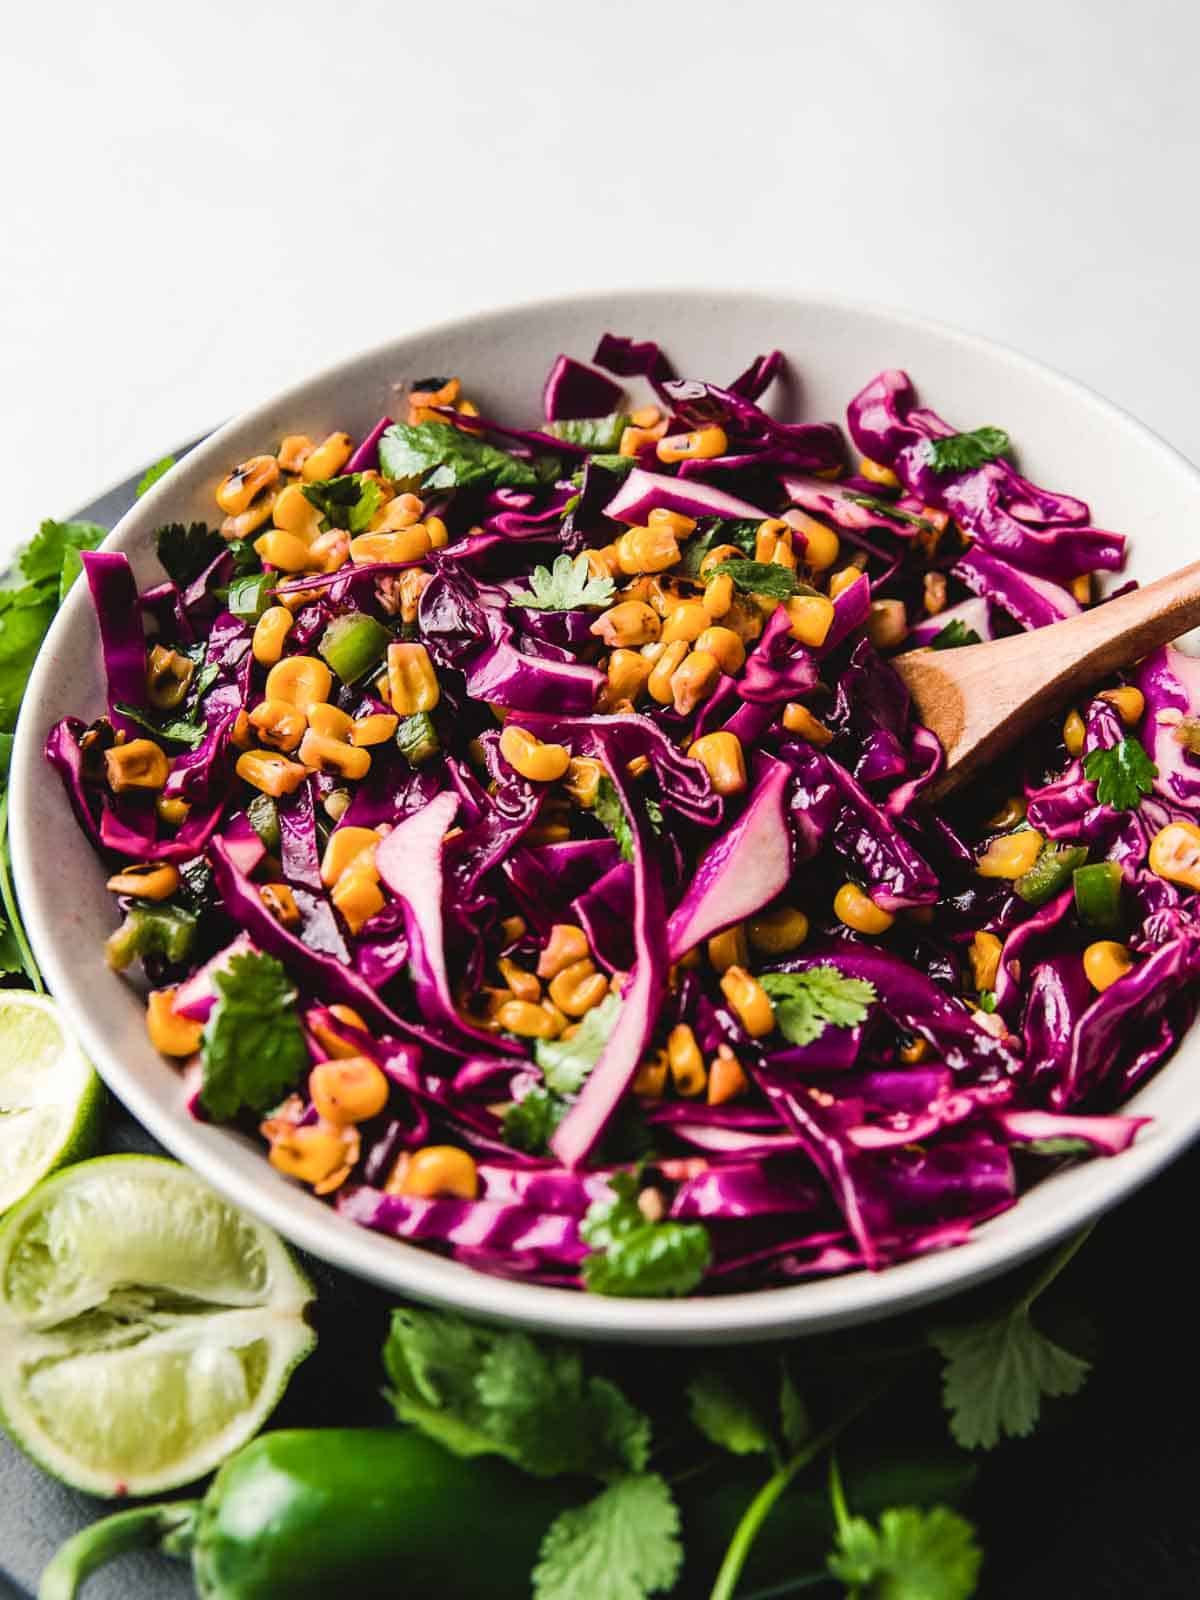 Corn and Red Cabbage Slaw in a bowl with a wooden spoon.